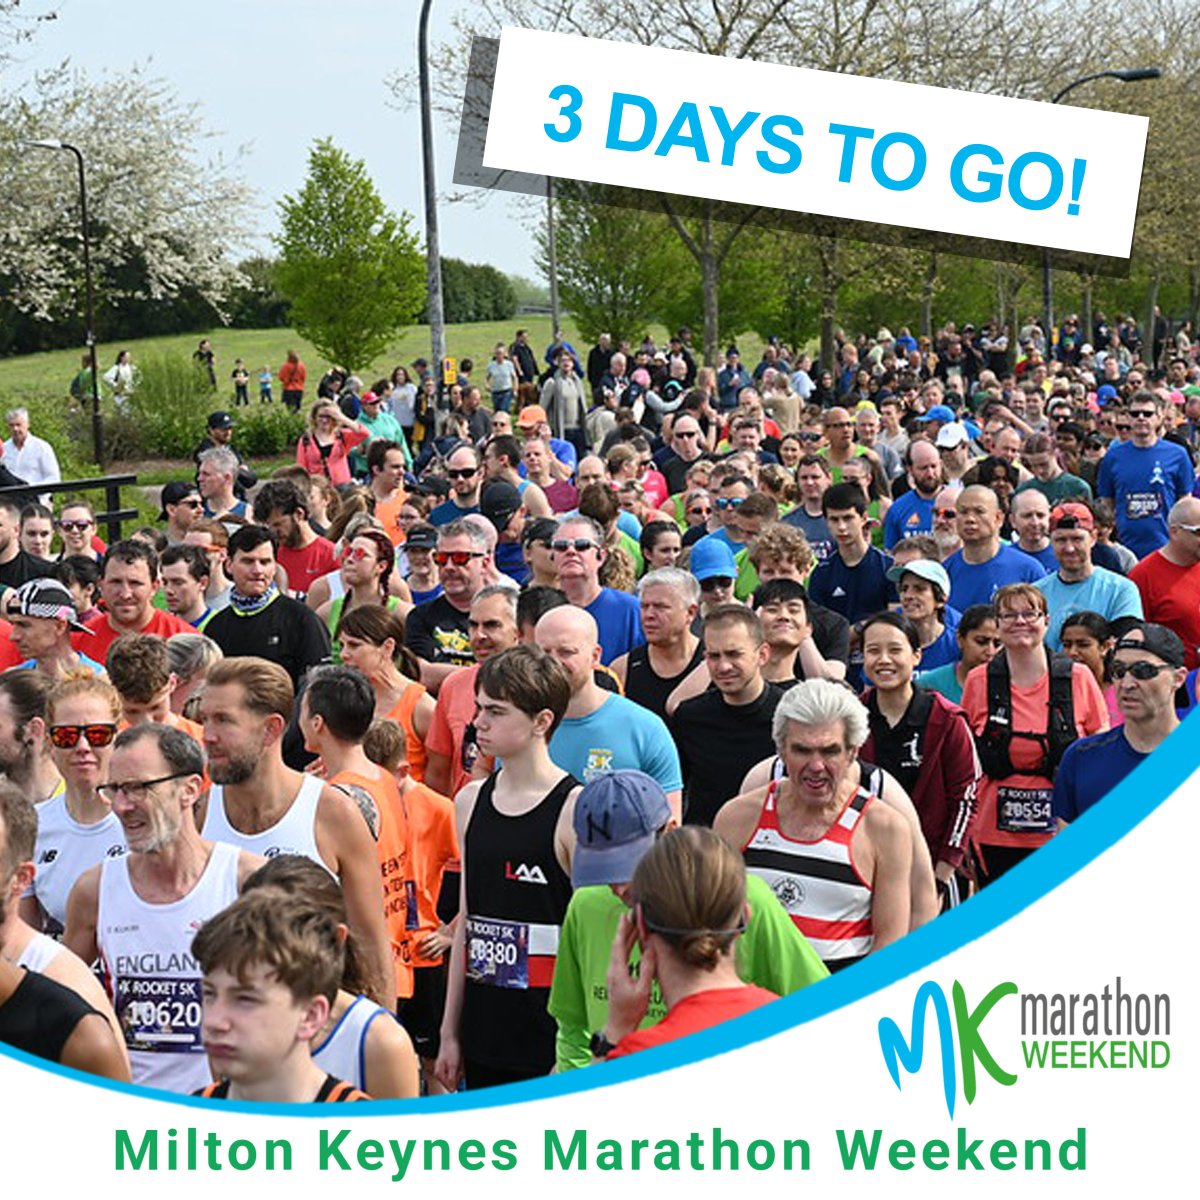 🚨 3 DAYS TO GO UNTIL OUR BIG WEEKEND! 🚨 Get ready to lace up those trainers and conquer the course with us! Let's make memories and crush those goals together 💪 check out our race guides for all the details! mkmarathon.com/event-guide/